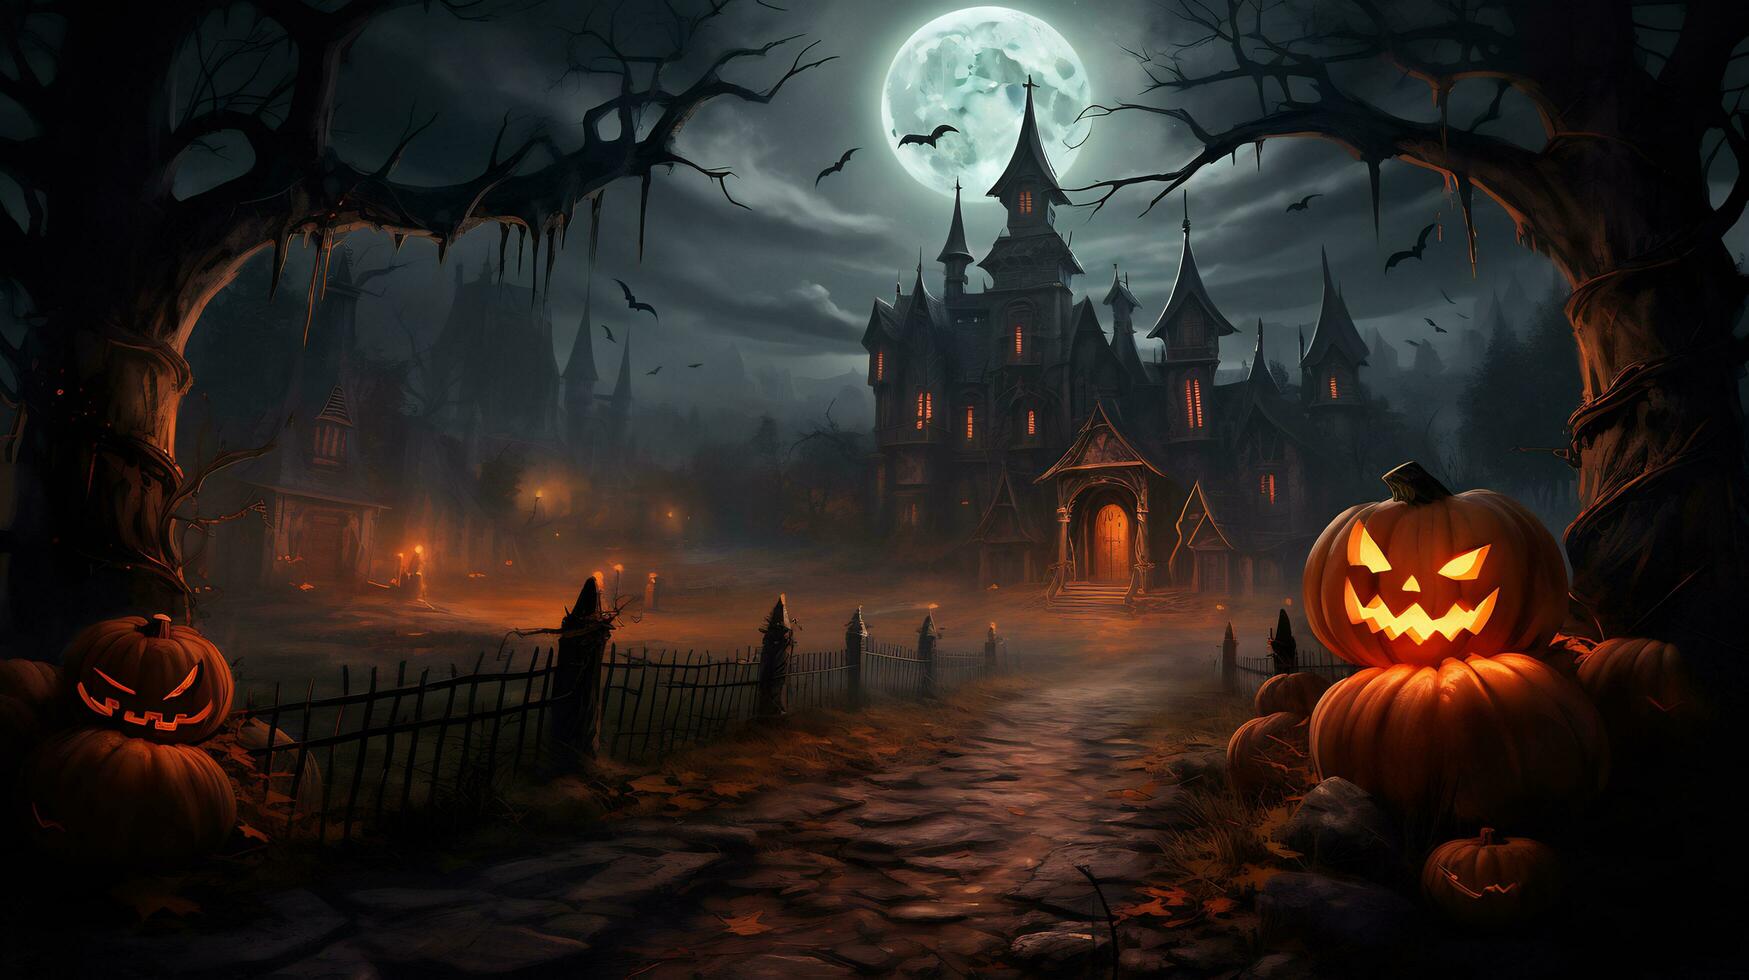 Spooky halloween wallpaper with pumpkin and old house 27807580 Stock ...